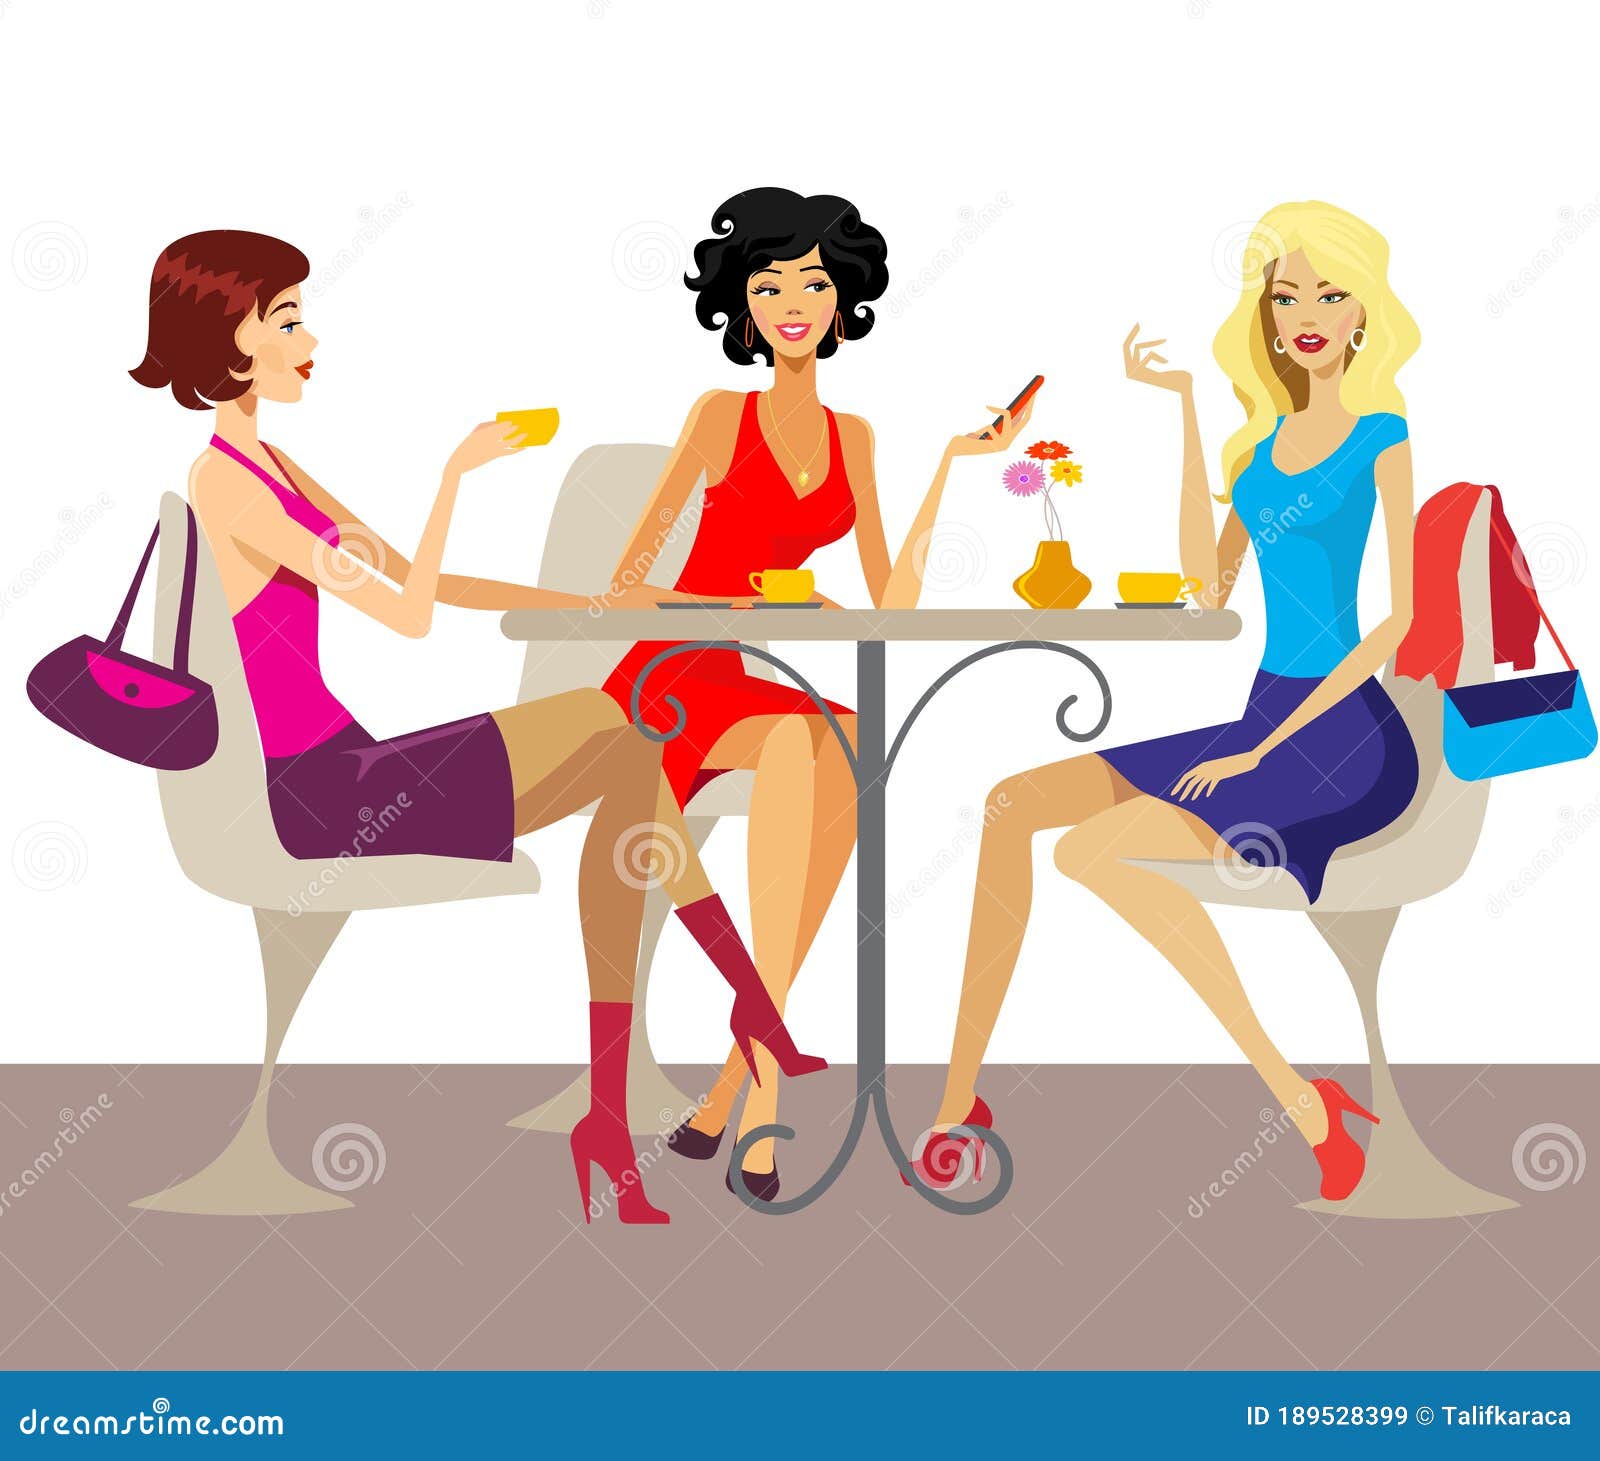 Beautiful Ladies Chatting in the Cafe. Stock Vector - Illustration of ...